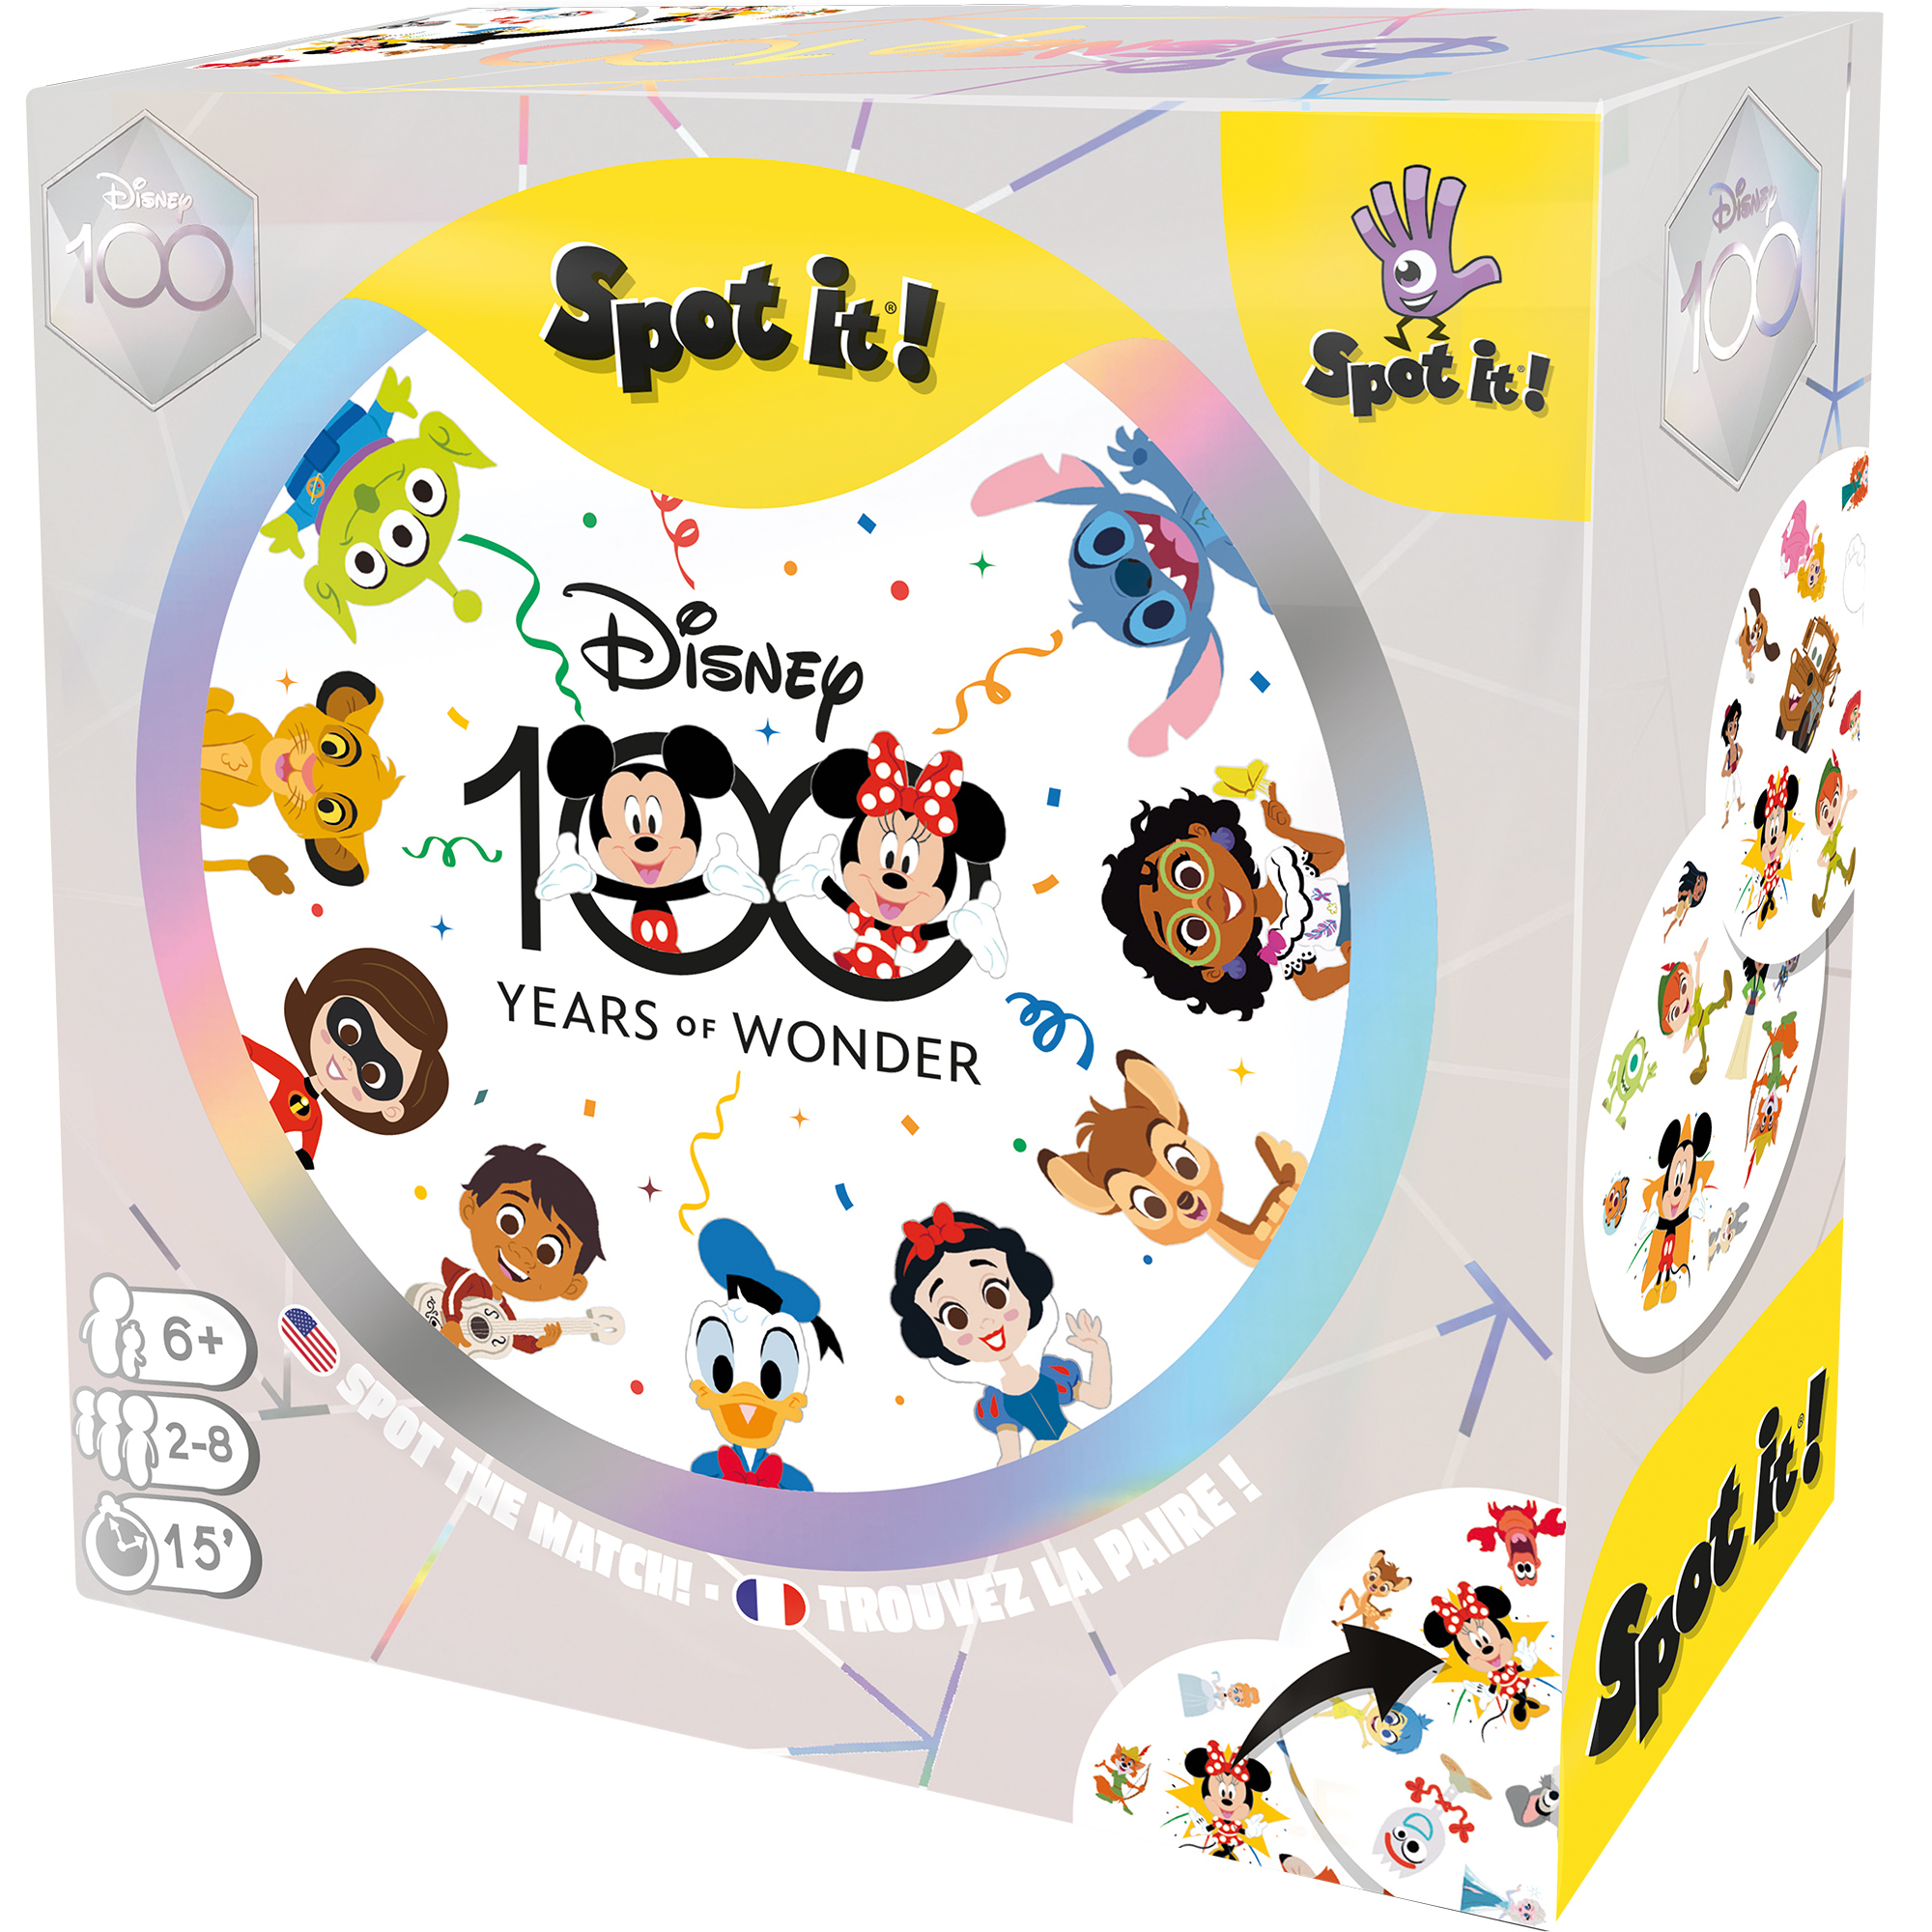 Spot It Disney 100th Anniversary Family Card Game for Ages 6 and up, from Asmodee - image 1 of 5